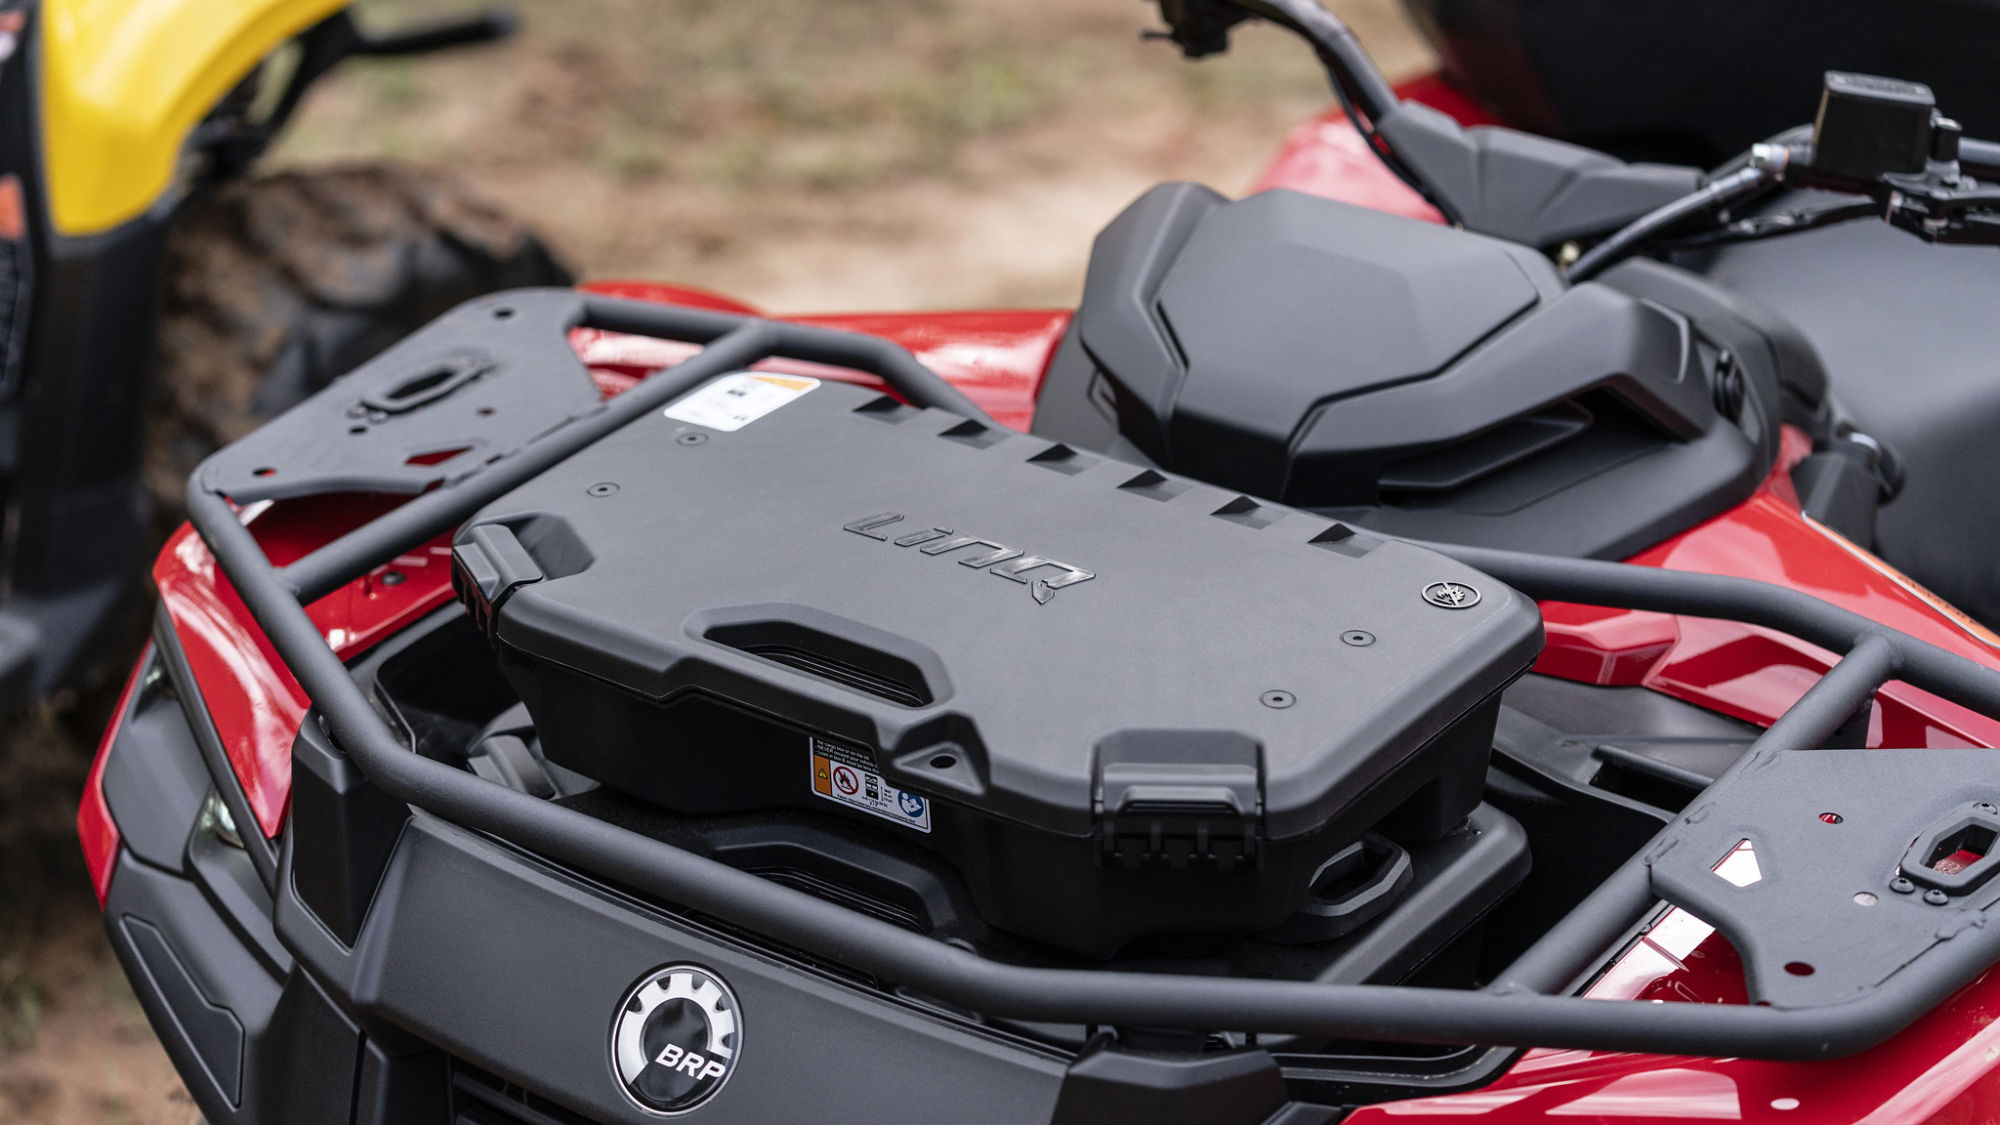 LinQ storage box on the front of a Can-Am Outlander 500